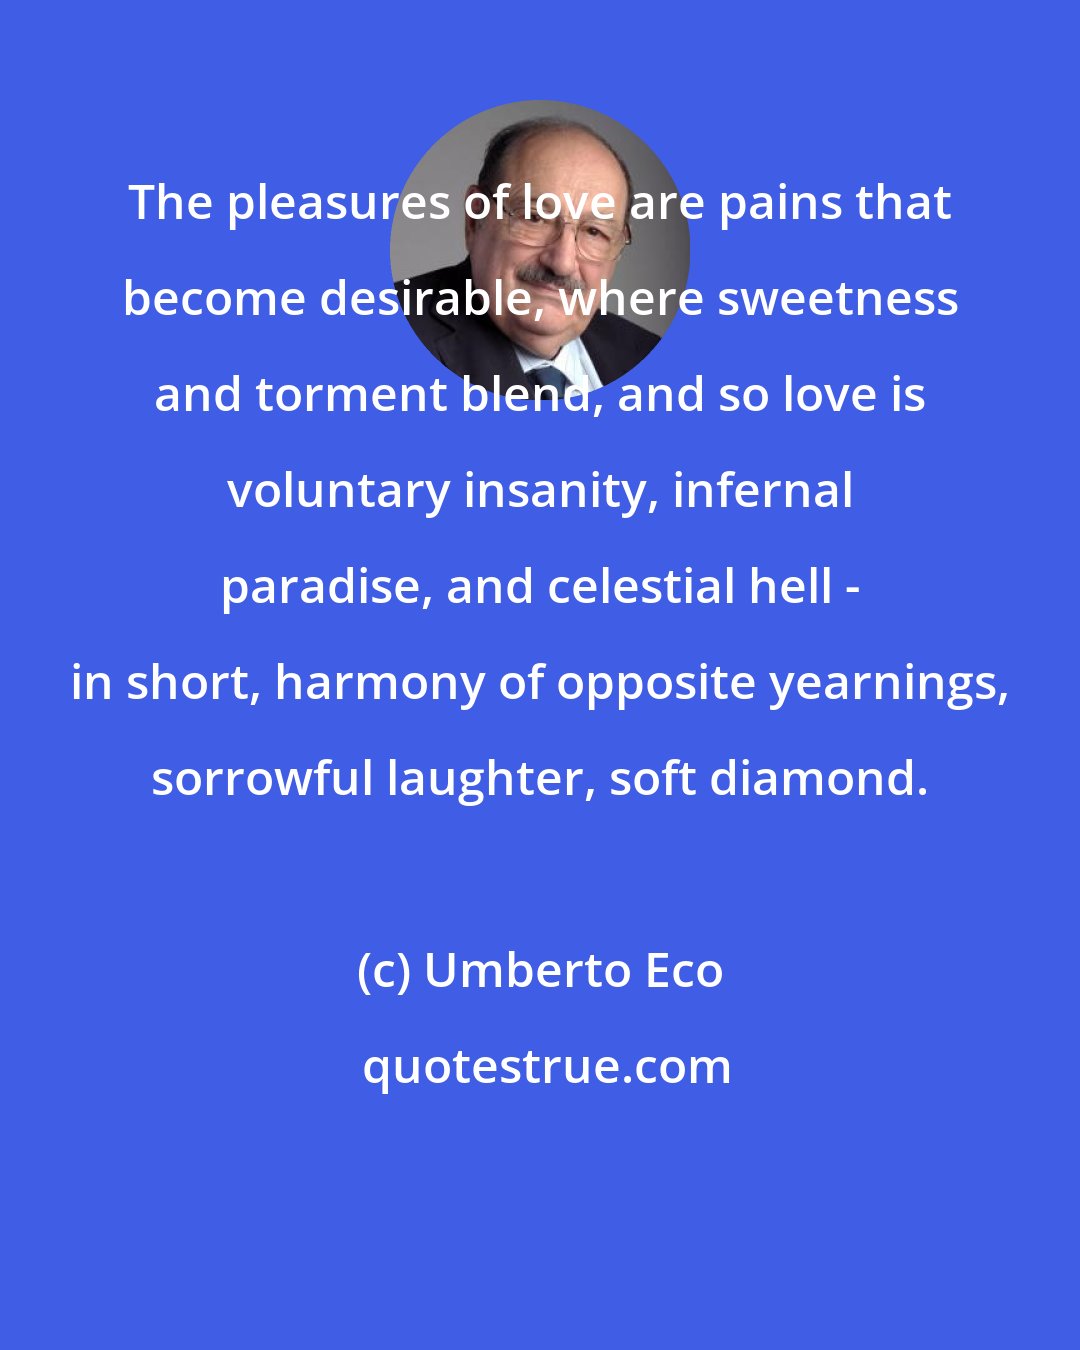 Umberto Eco: The pleasures of love are pains that become desirable, where sweetness and torment blend, and so love is voluntary insanity, infernal paradise, and celestial hell - in short, harmony of opposite yearnings, sorrowful laughter, soft diamond.